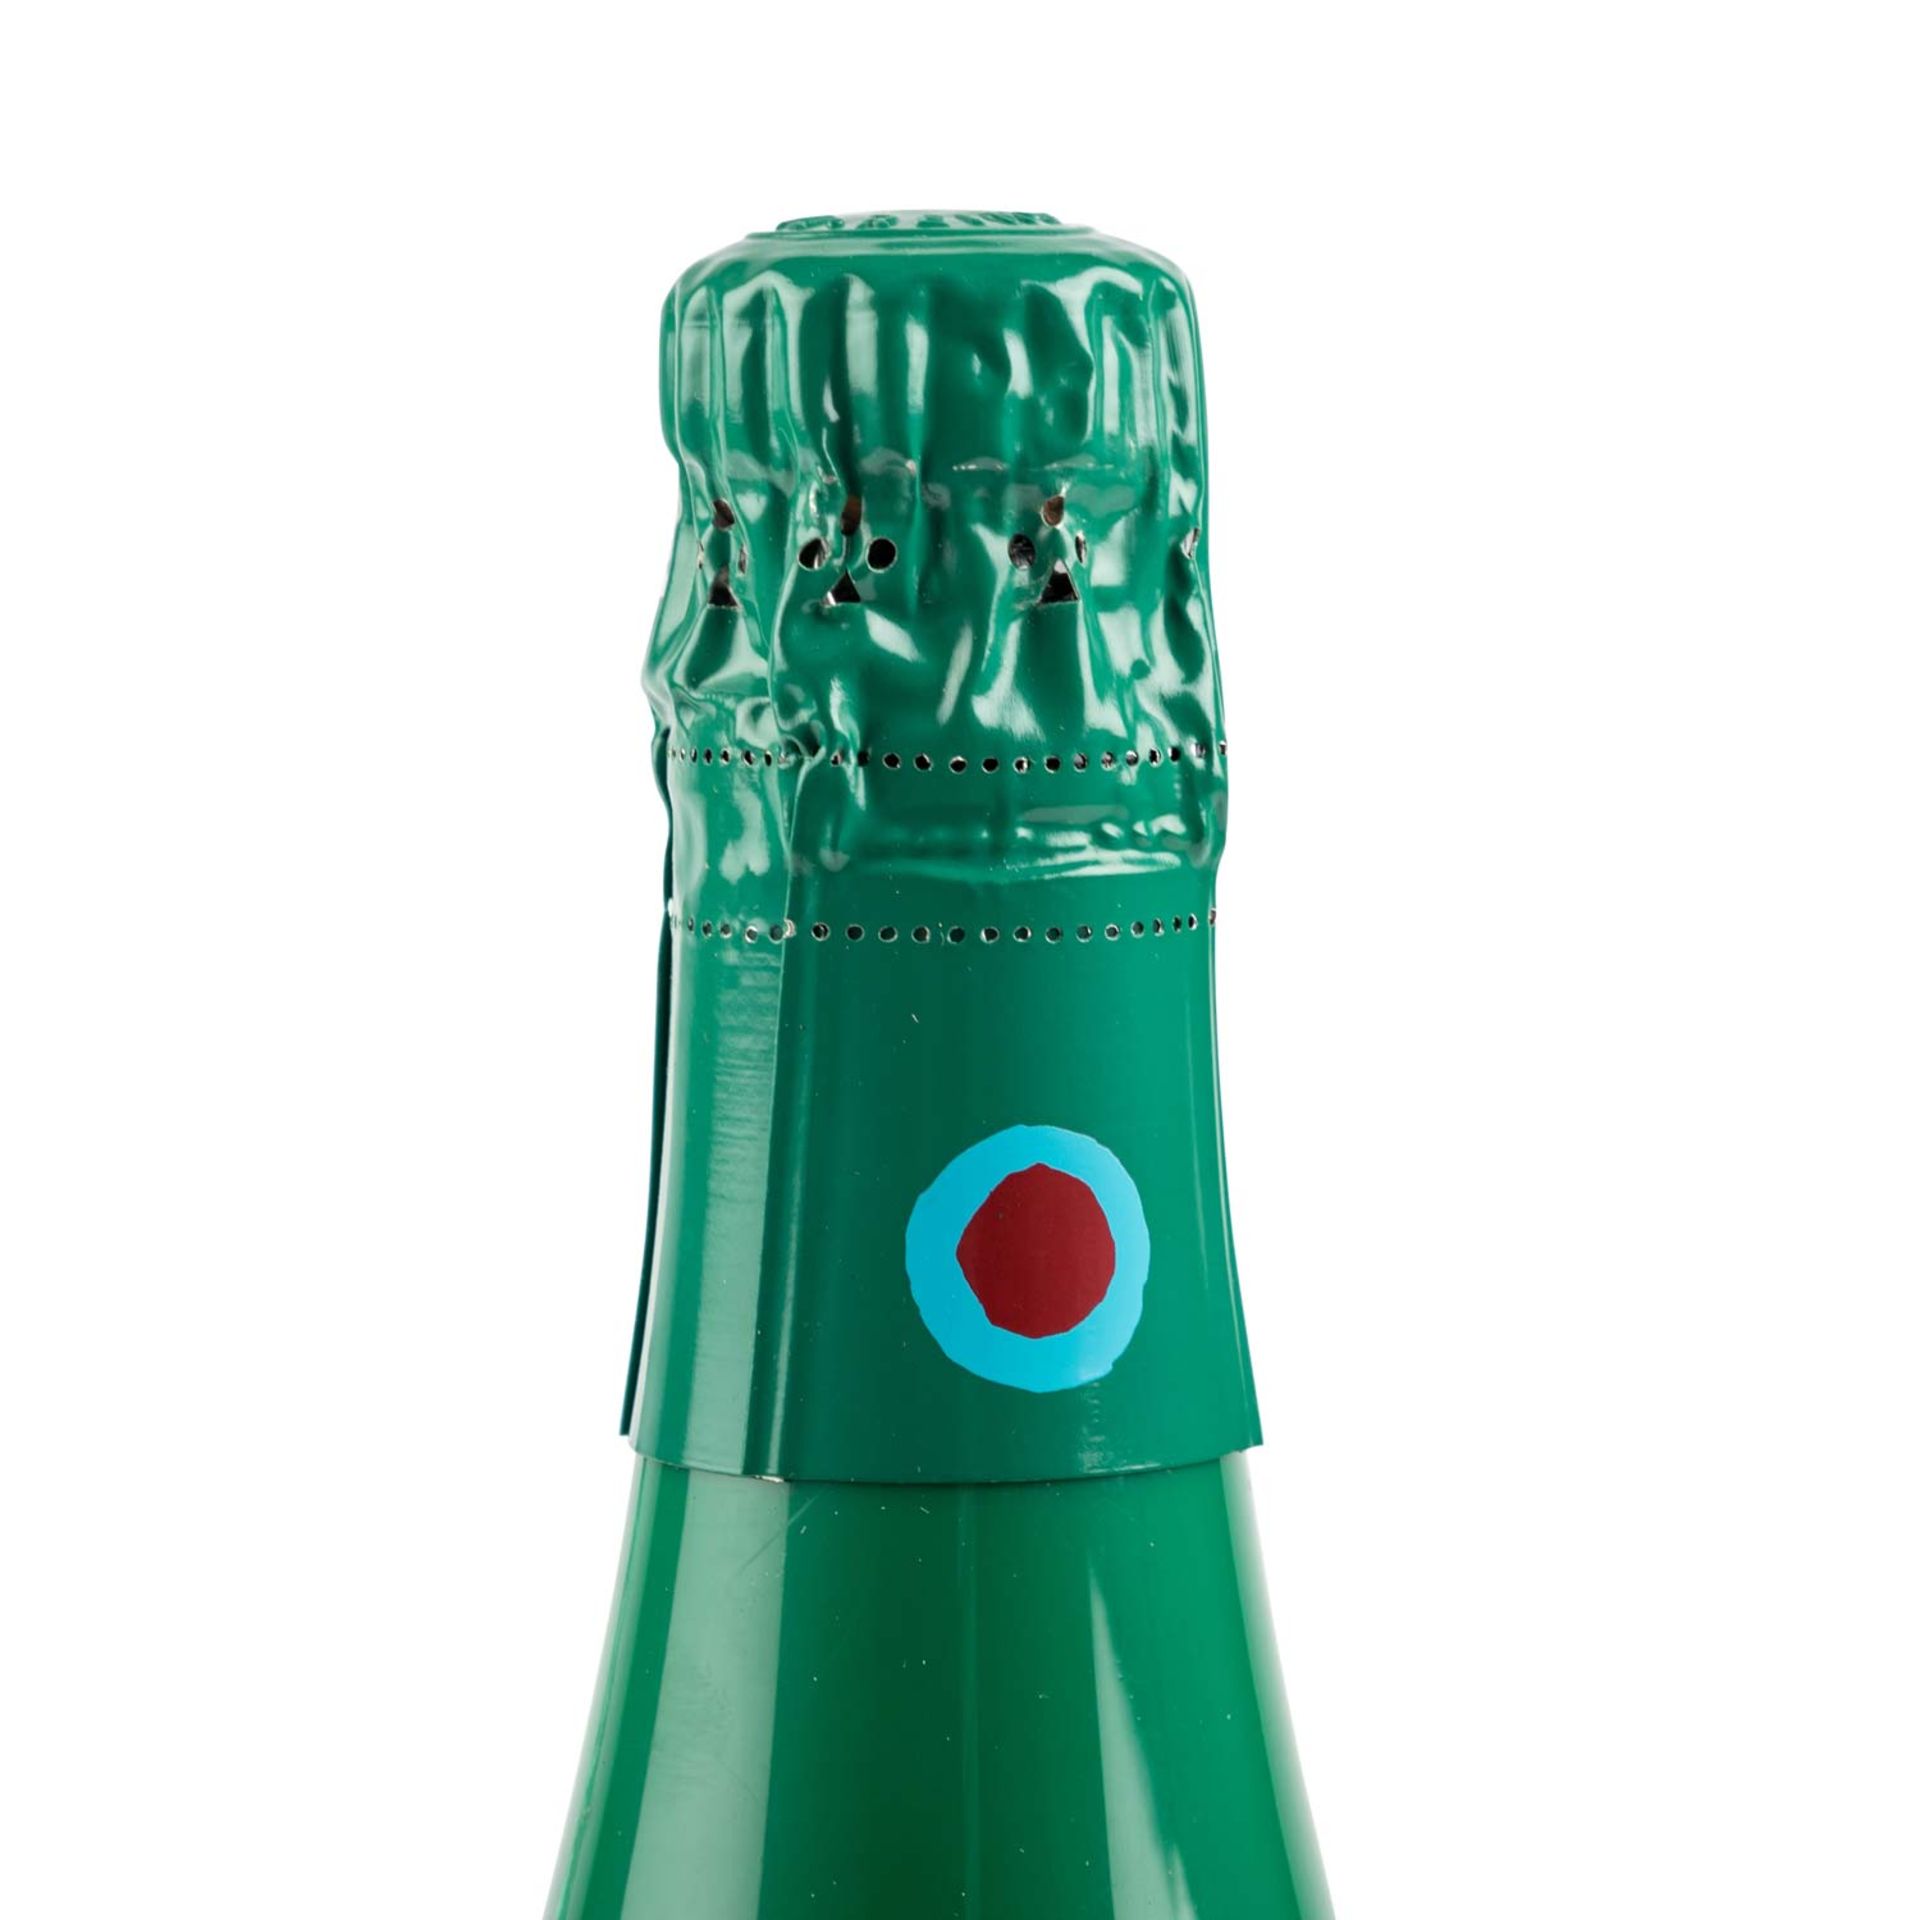 TAITTINGER Champagner 'Collection' 1 Flasche 'Corneille' 1990 - Image 4 of 8